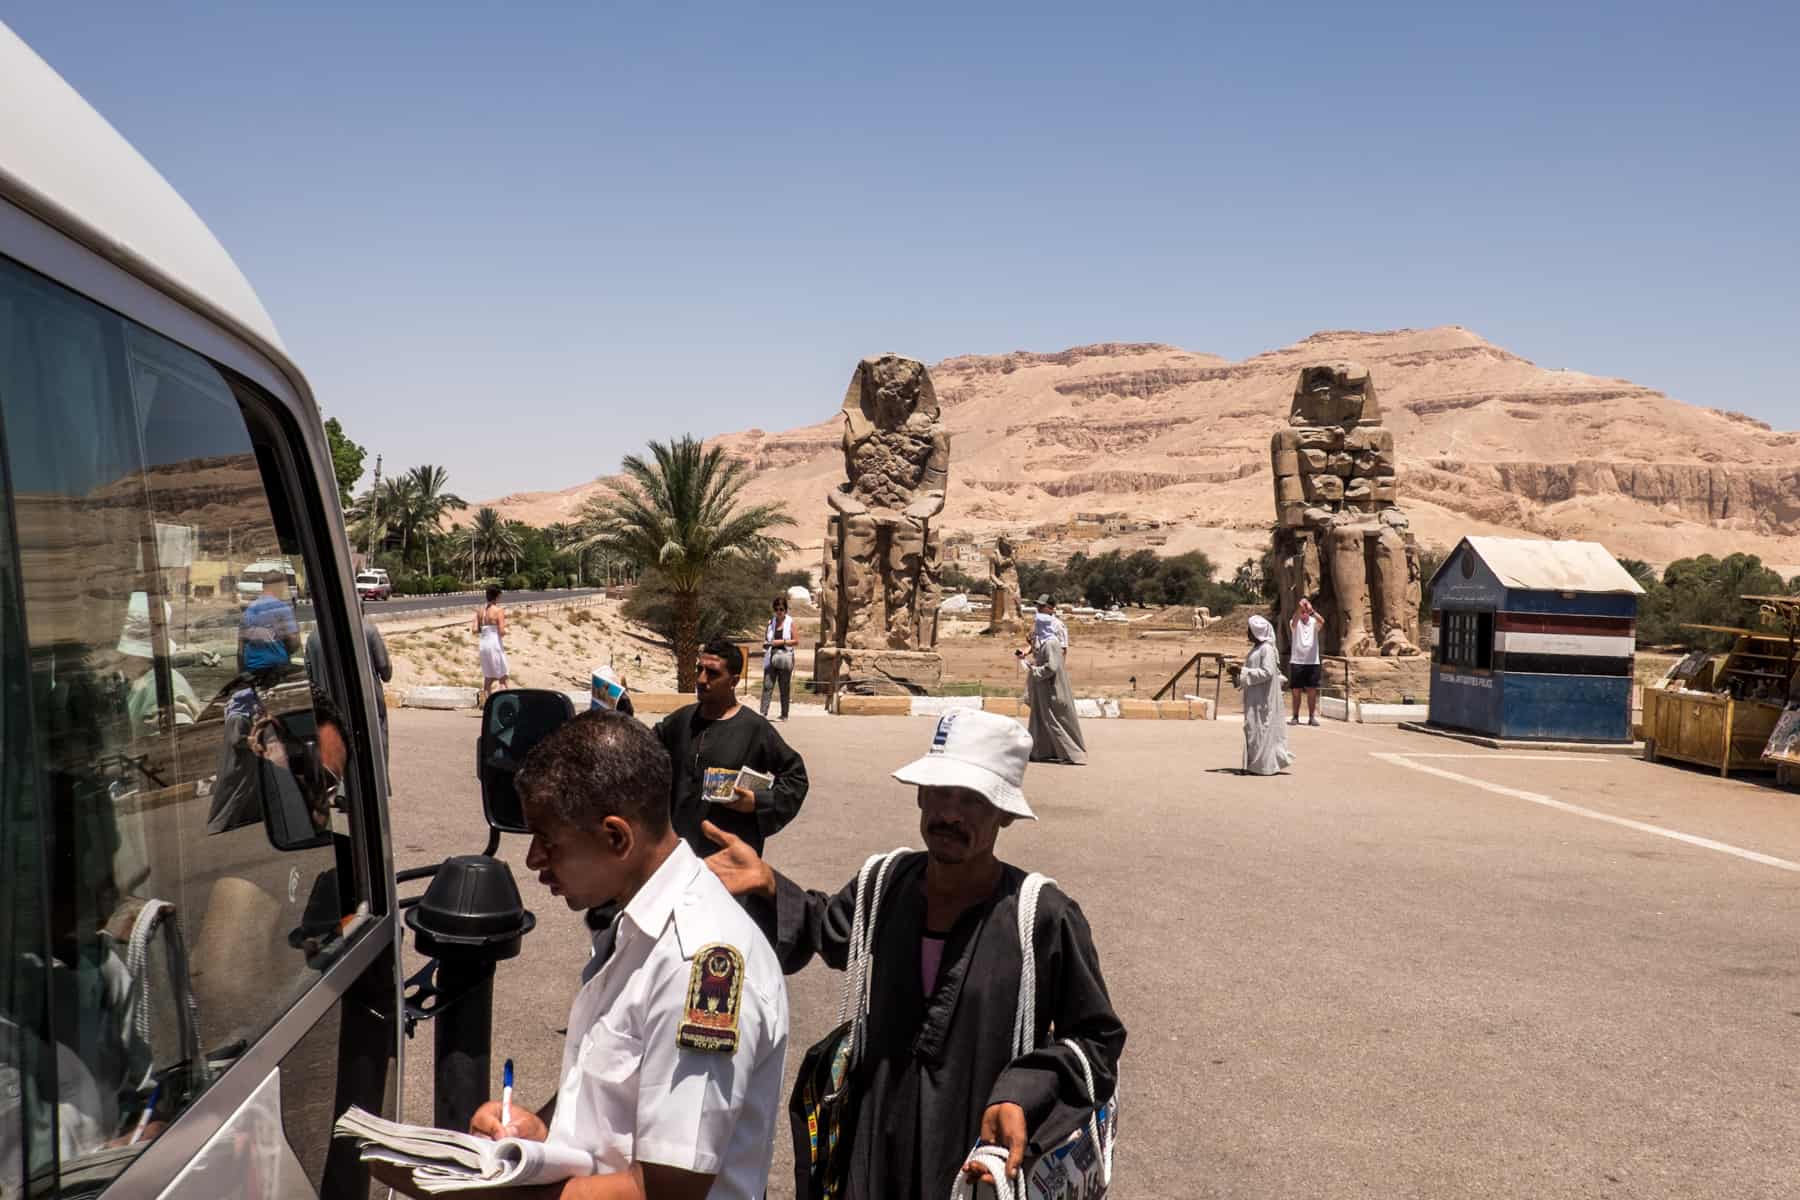 The Egyptian Tourism and Antiquities Police checking a white tourism bus at an ancient statue site, with vendors behind selling handicrafts.